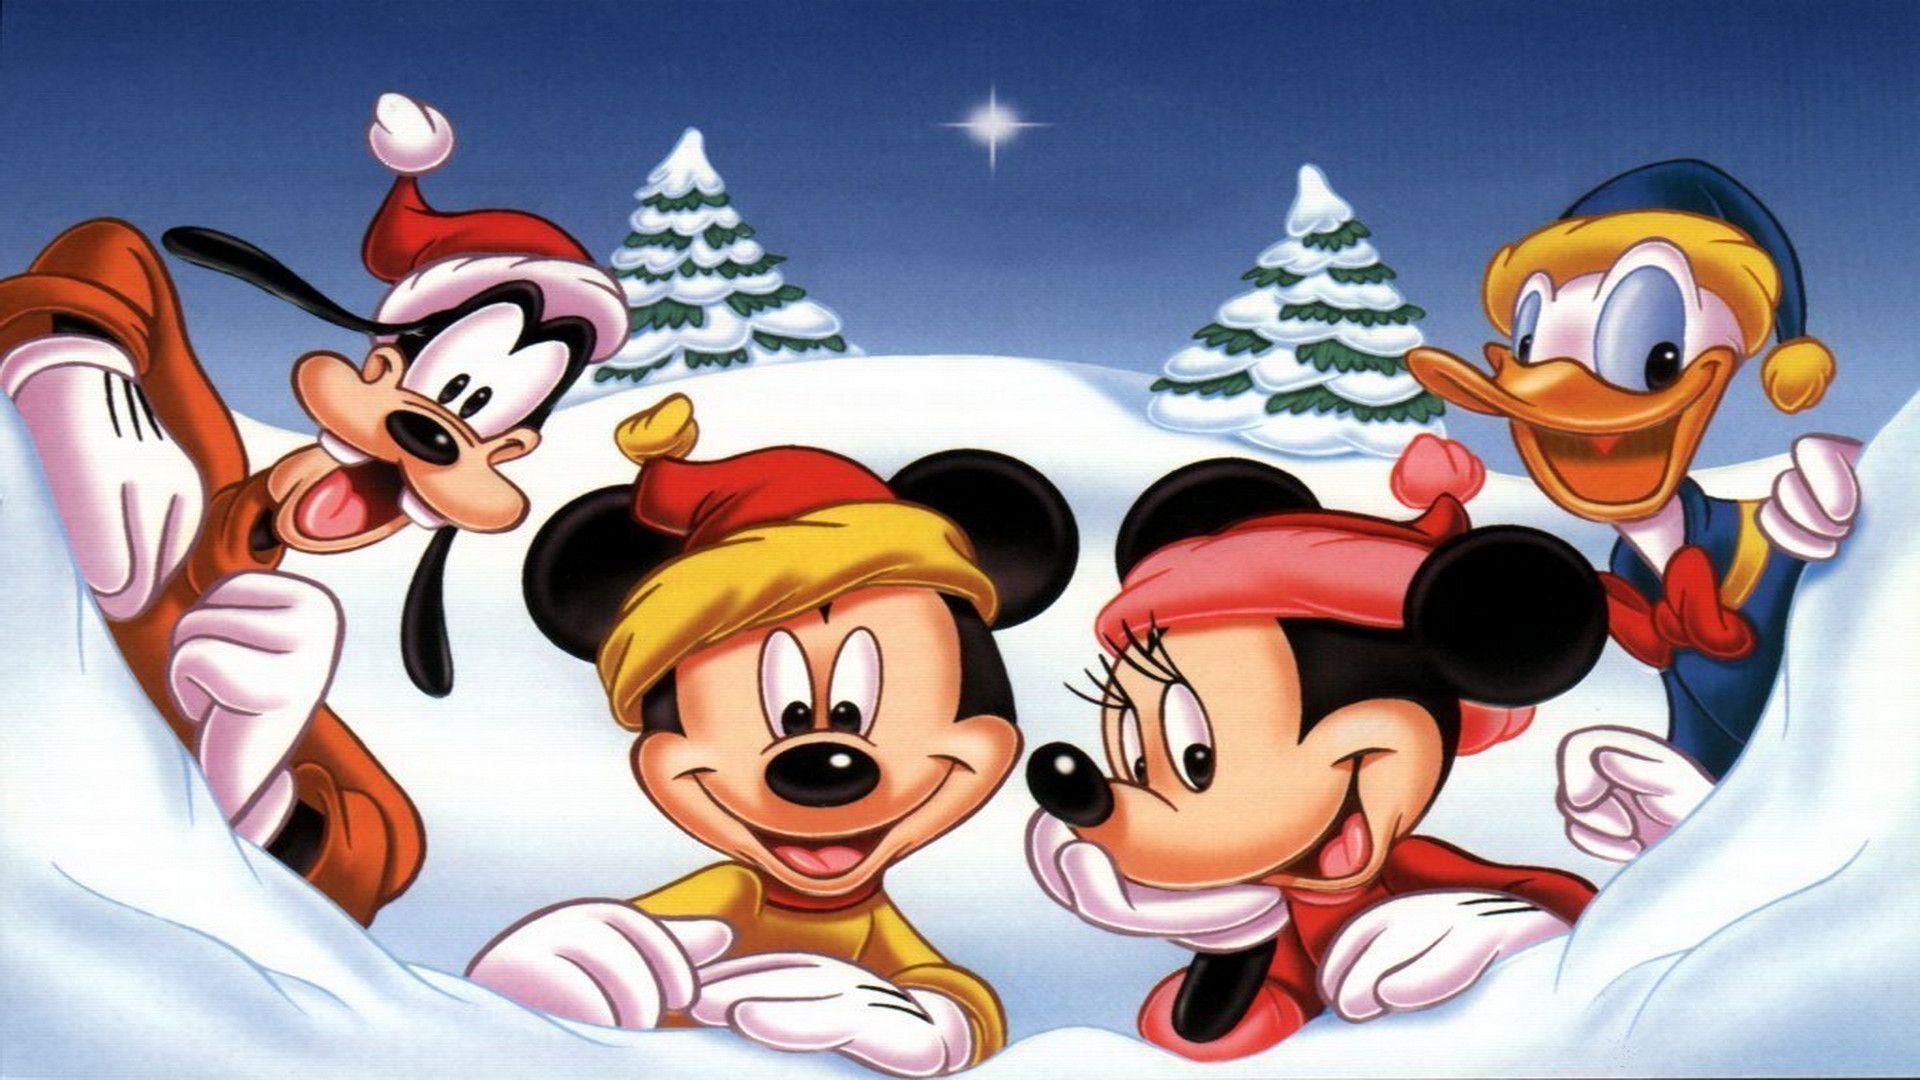 Wallpapers For > Disney Christmas Backgrounds